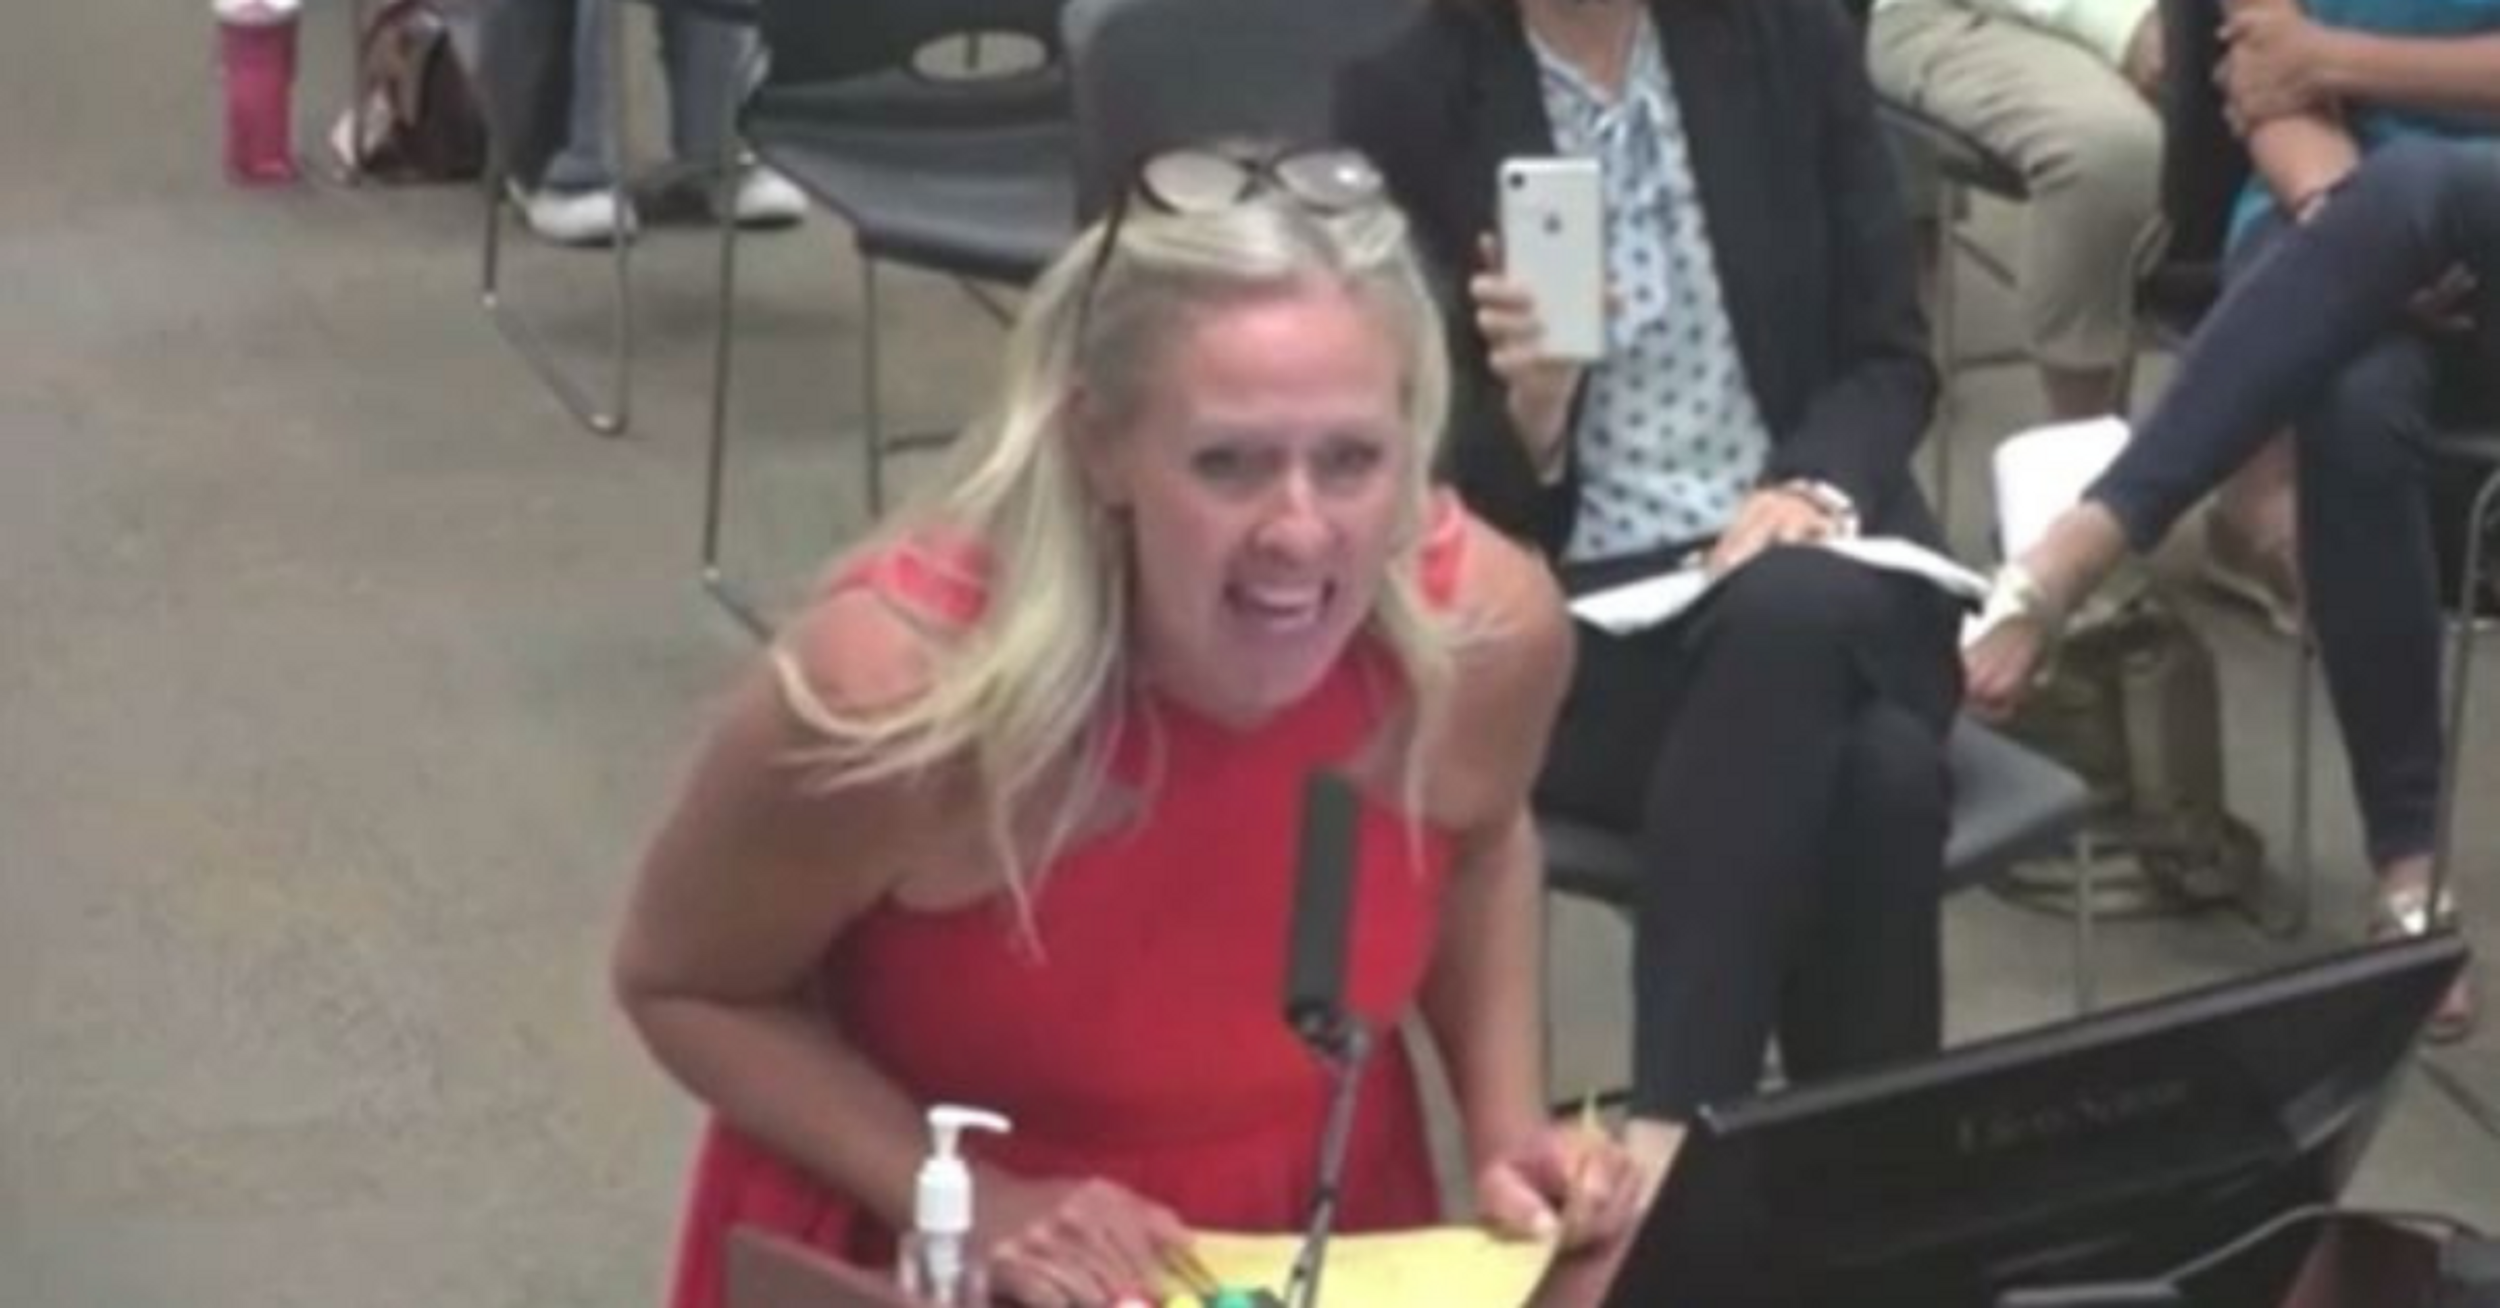 Texas School Board Meeting Goes Off The Rails After Anti-Masker Starts Ranting About Anal Sex